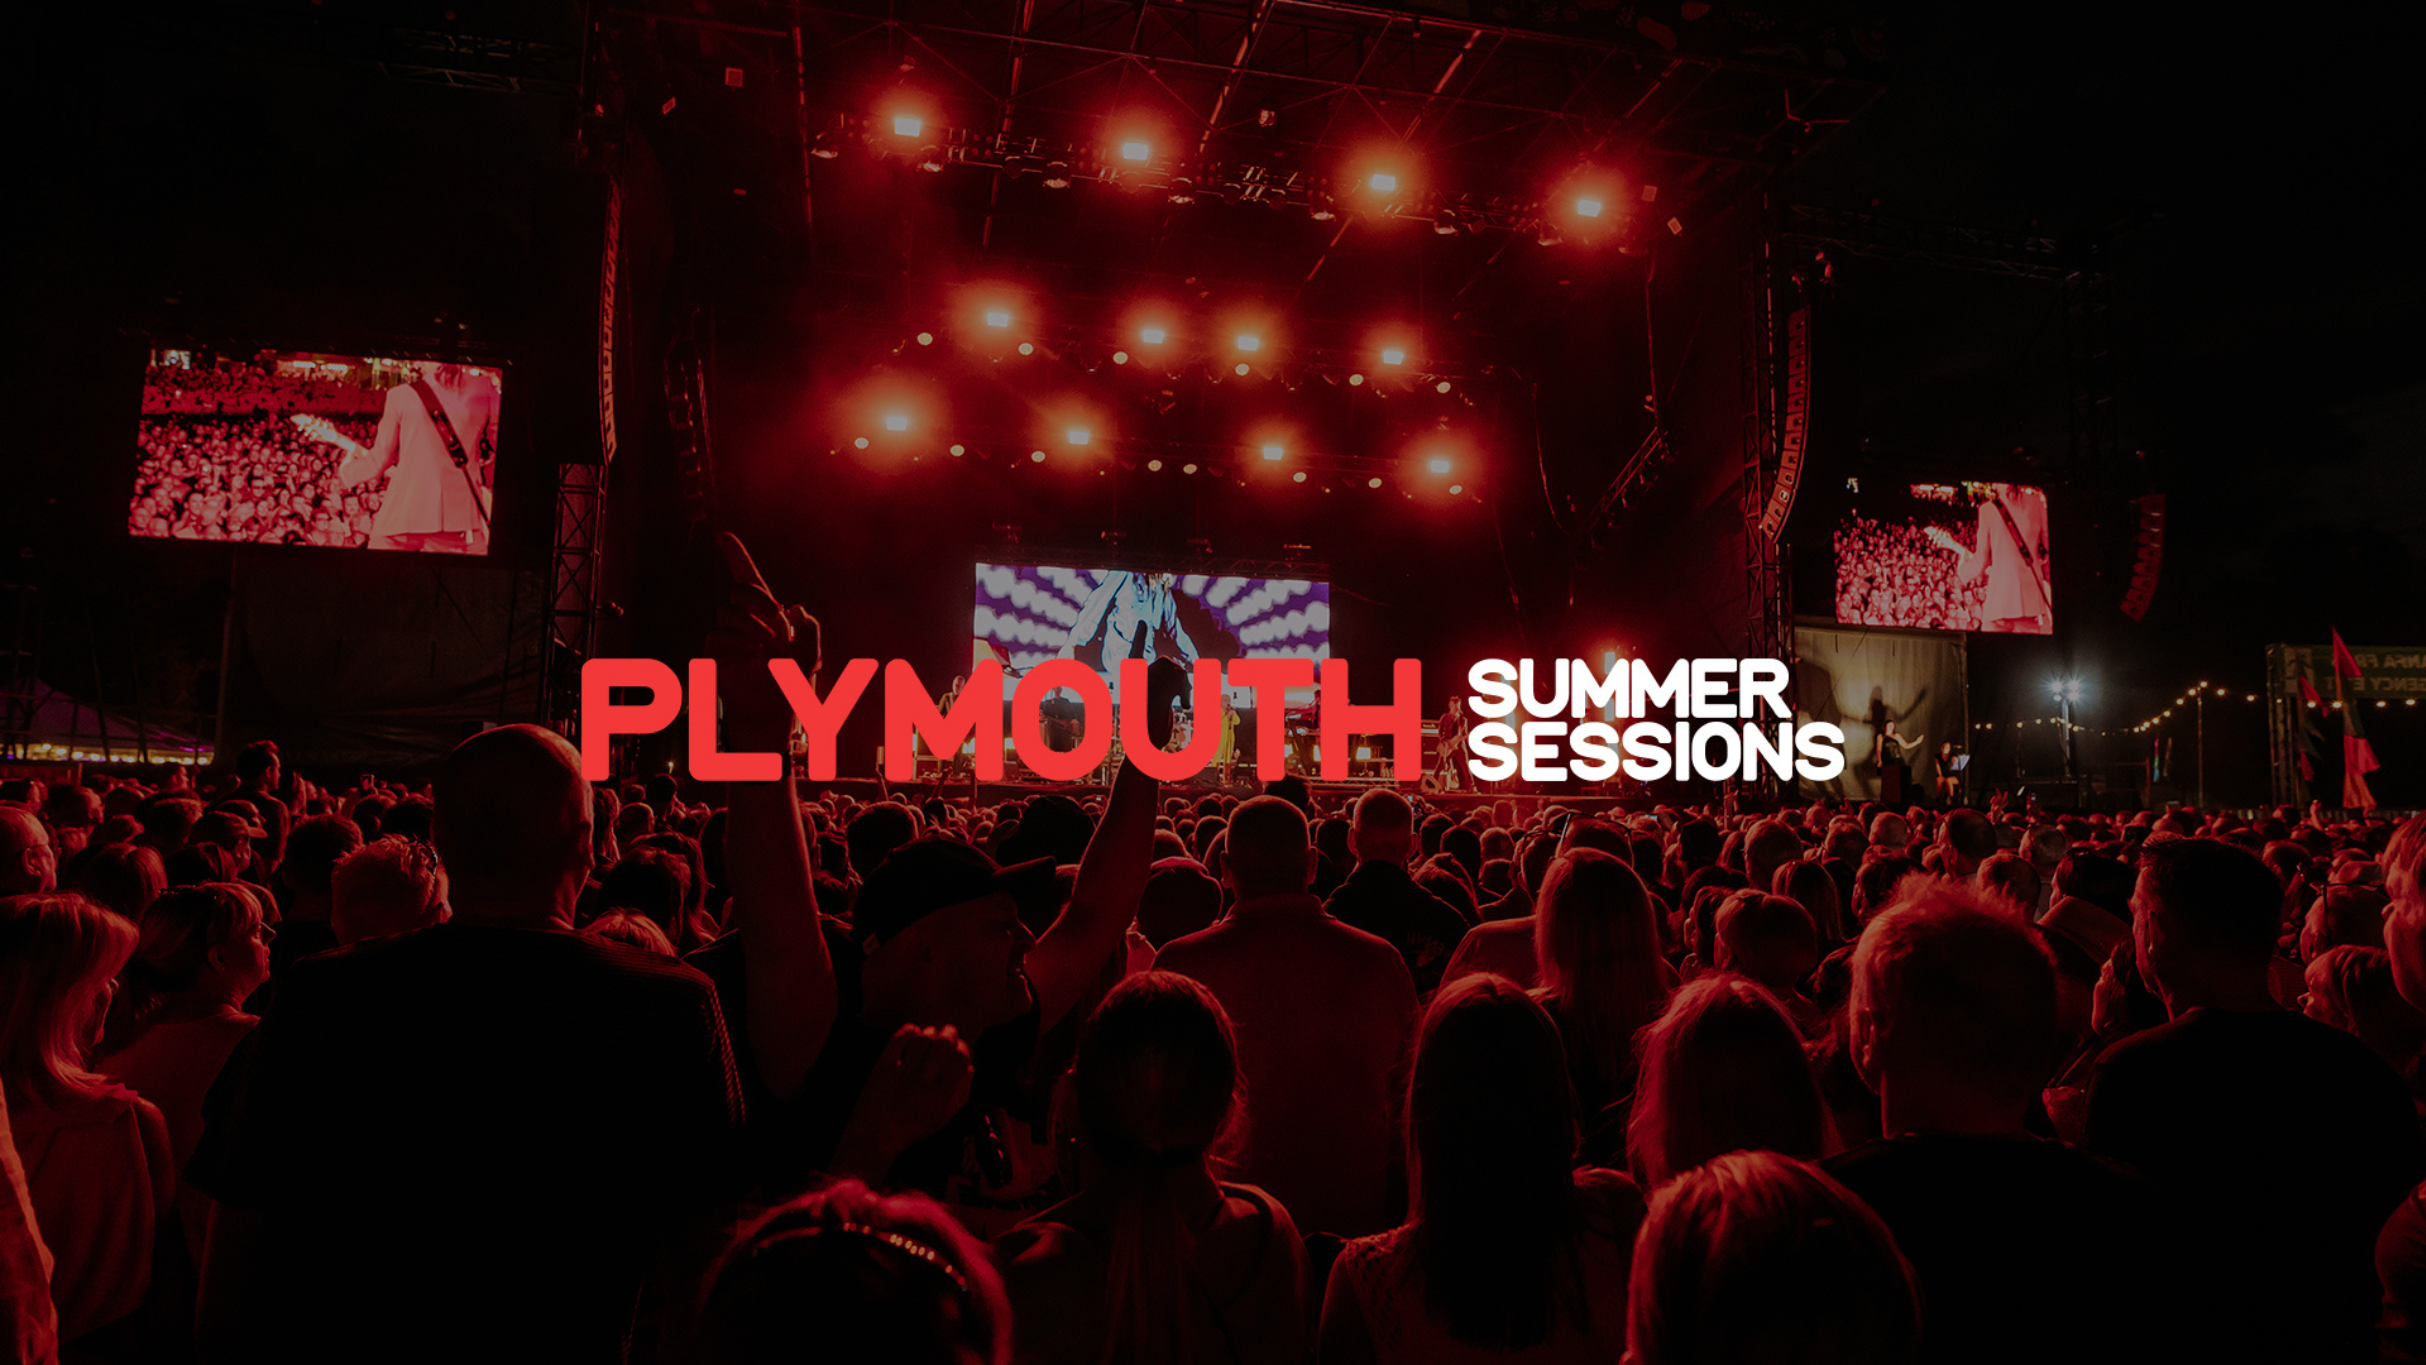 Plymouth Summer Sessions - Bryan Adams in Plymouth promo photo for Summer Sessions presale offer code